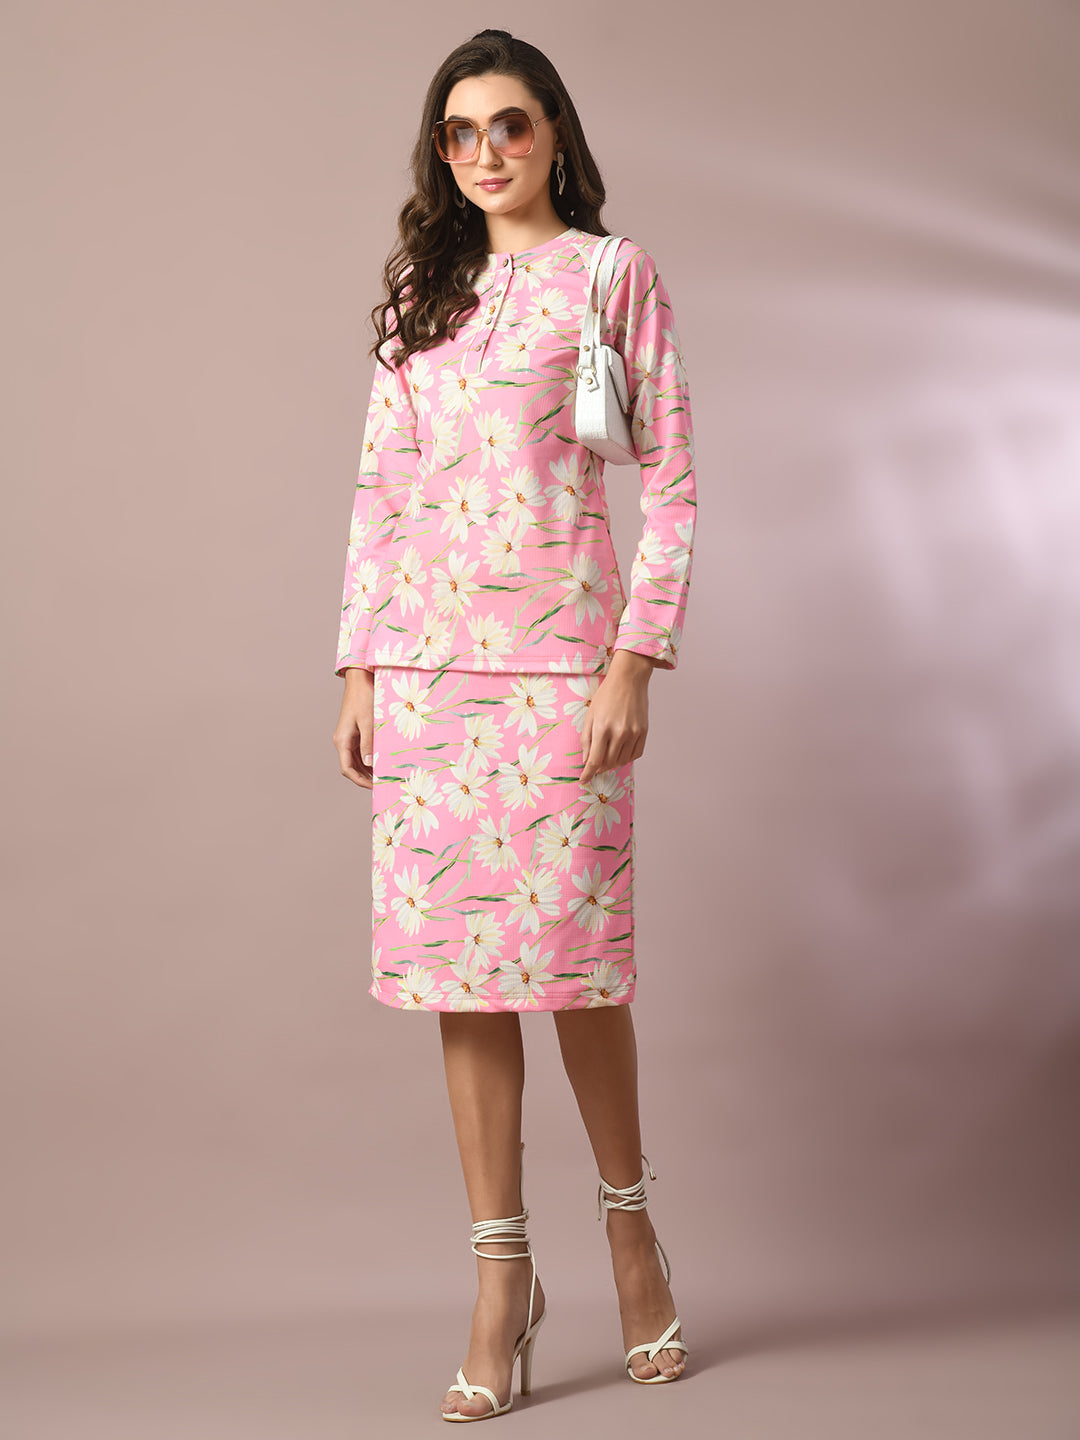 Women's  Pink Printed Round Neck Party Top With Skirt Co-Ord Set  - Myshka